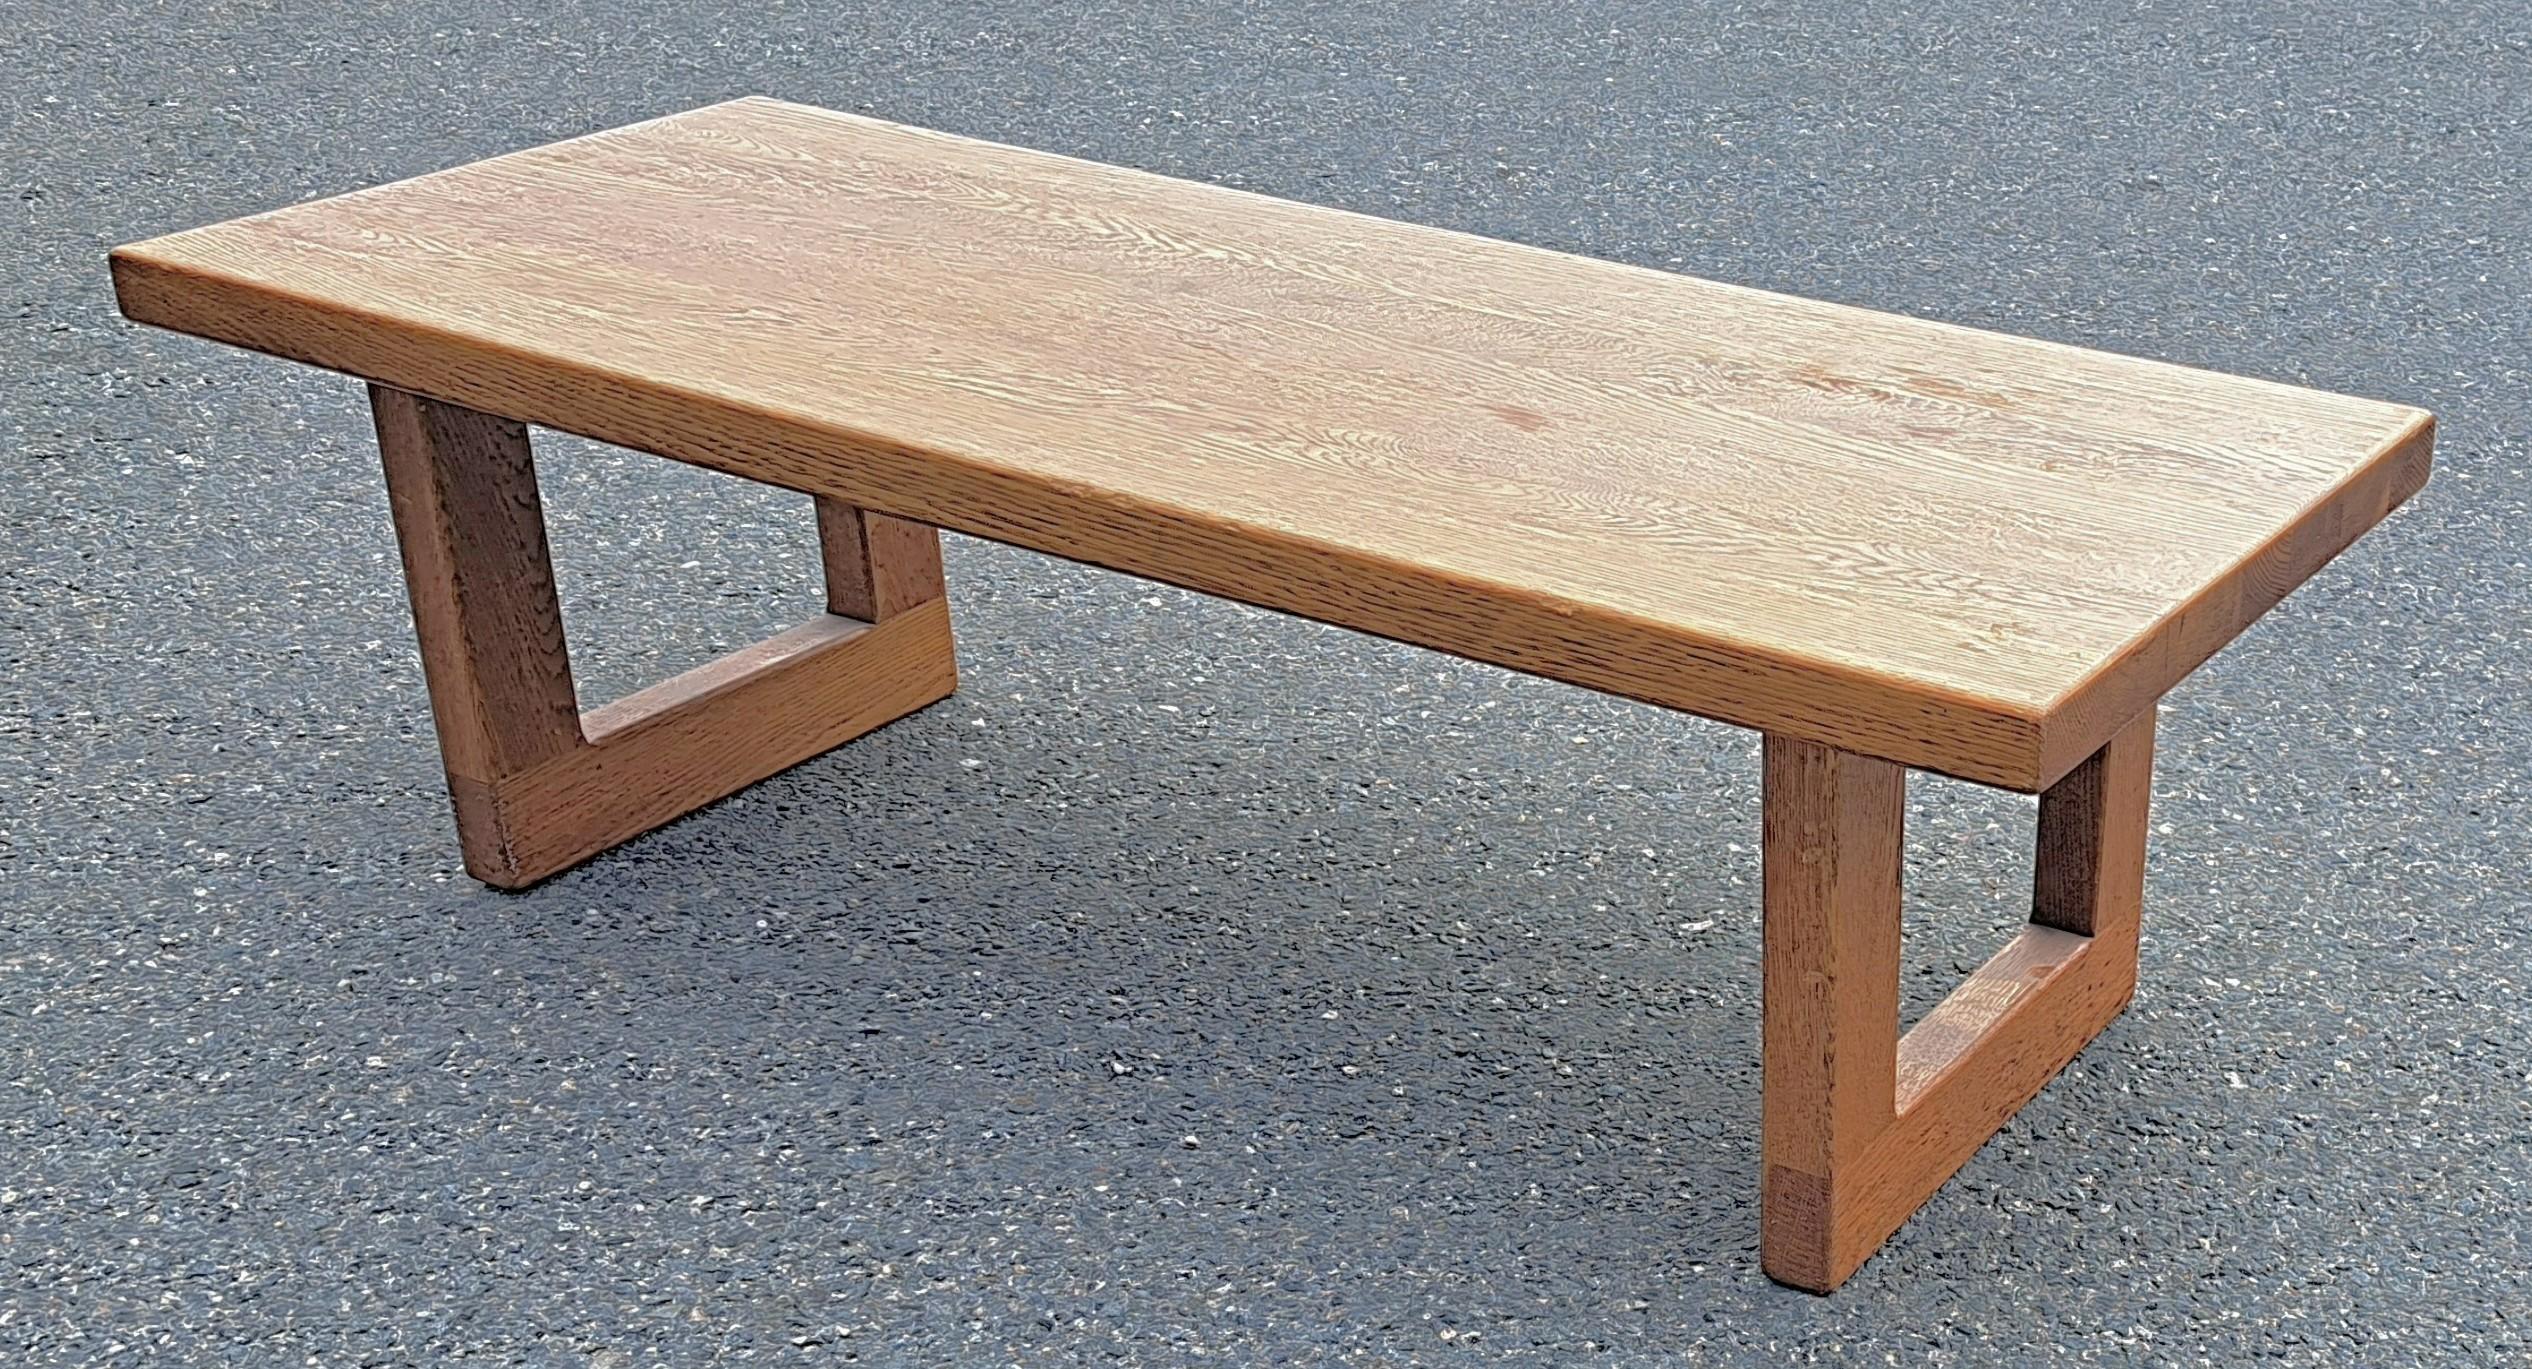 Mid-Century / Danish Modern style minimalist bench coffee table with stable closed loop base and heavy wood top. Very sturdy coffee table / bench.